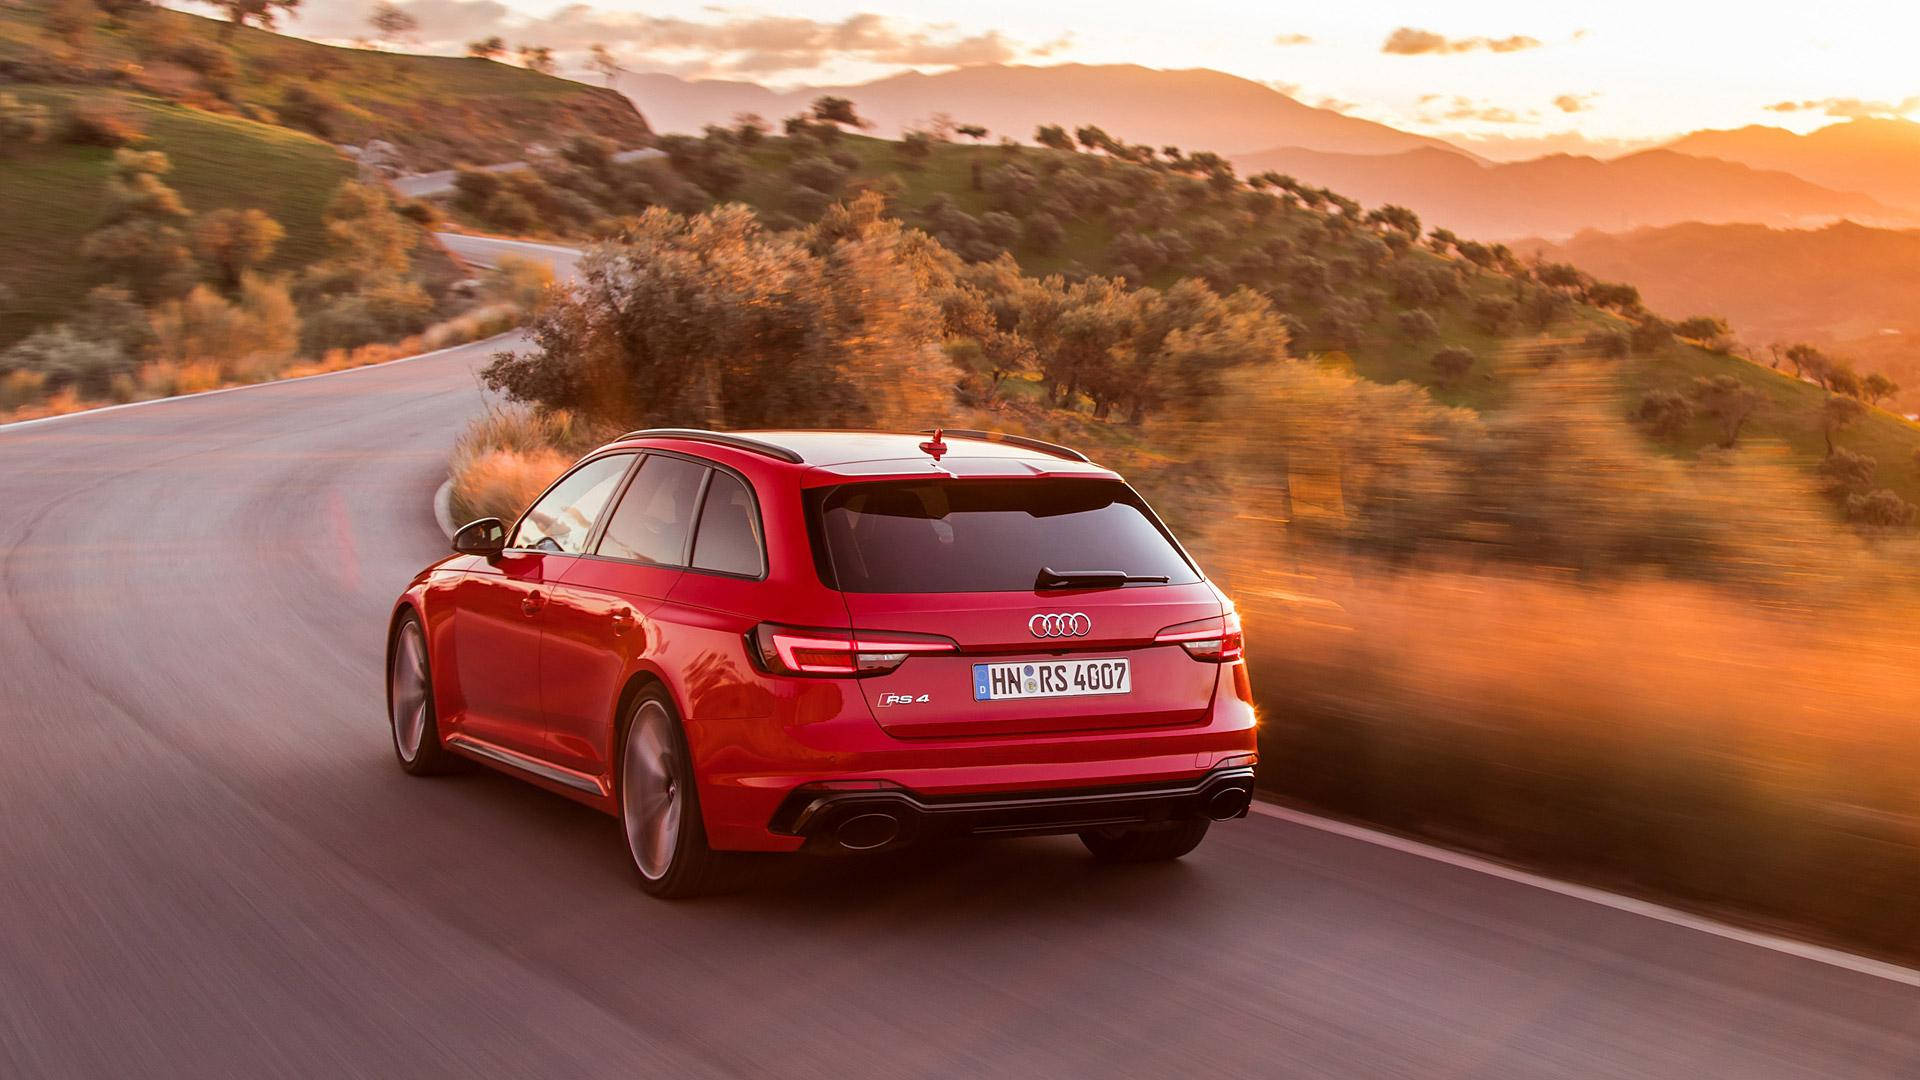 Caption: High-resolution Audi Rs 4 Amid The Winding Trees Background